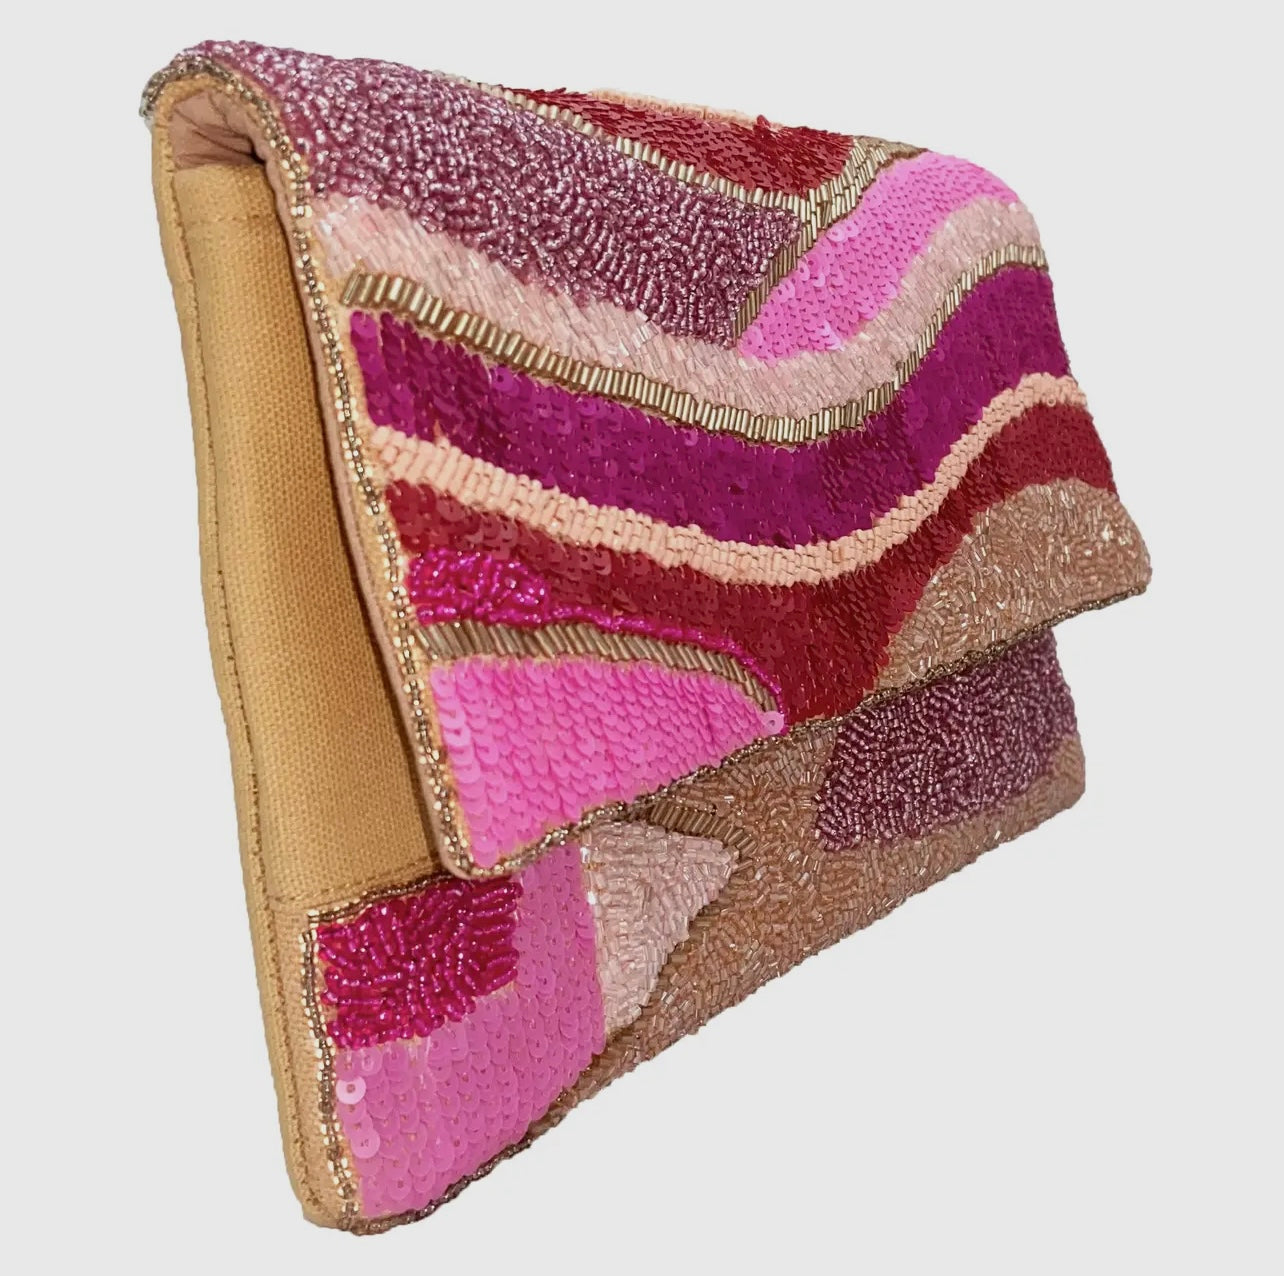 Shades of Pink Handmade Beaded Clutch